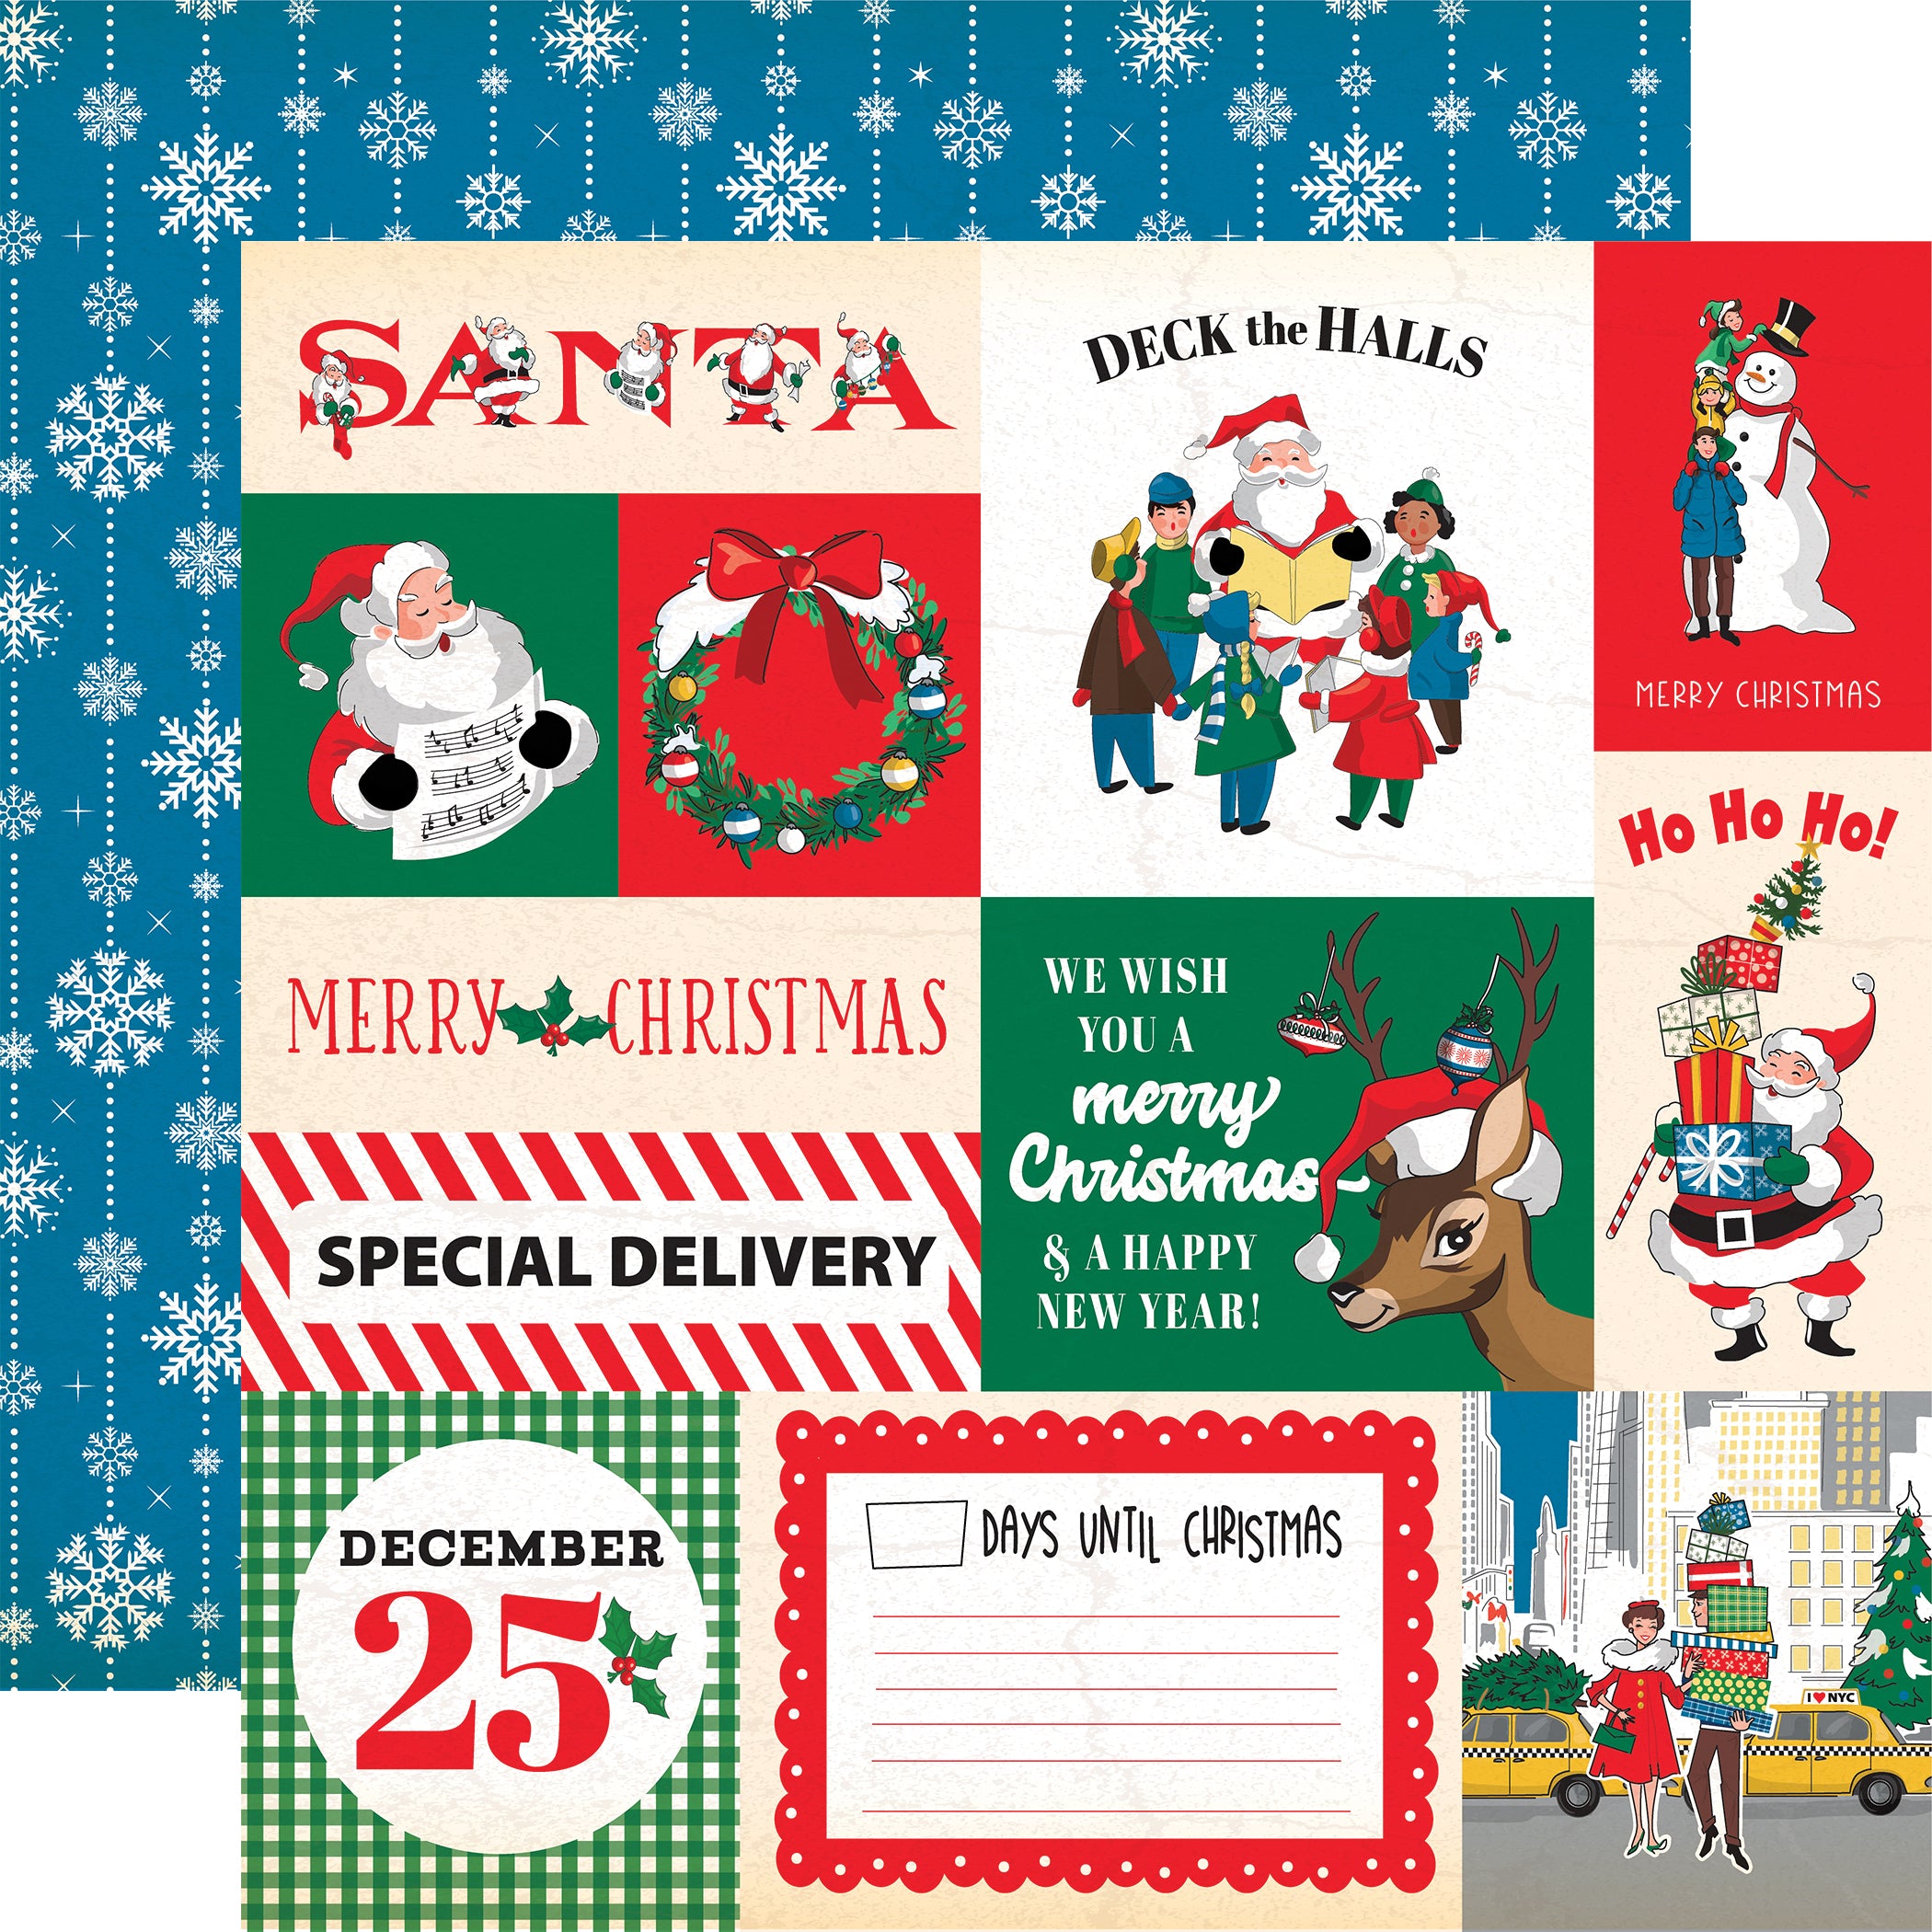 Season's Greetings Collection 12 x 12 Scrapbook Paper & Sticker Pack by Carta Bella